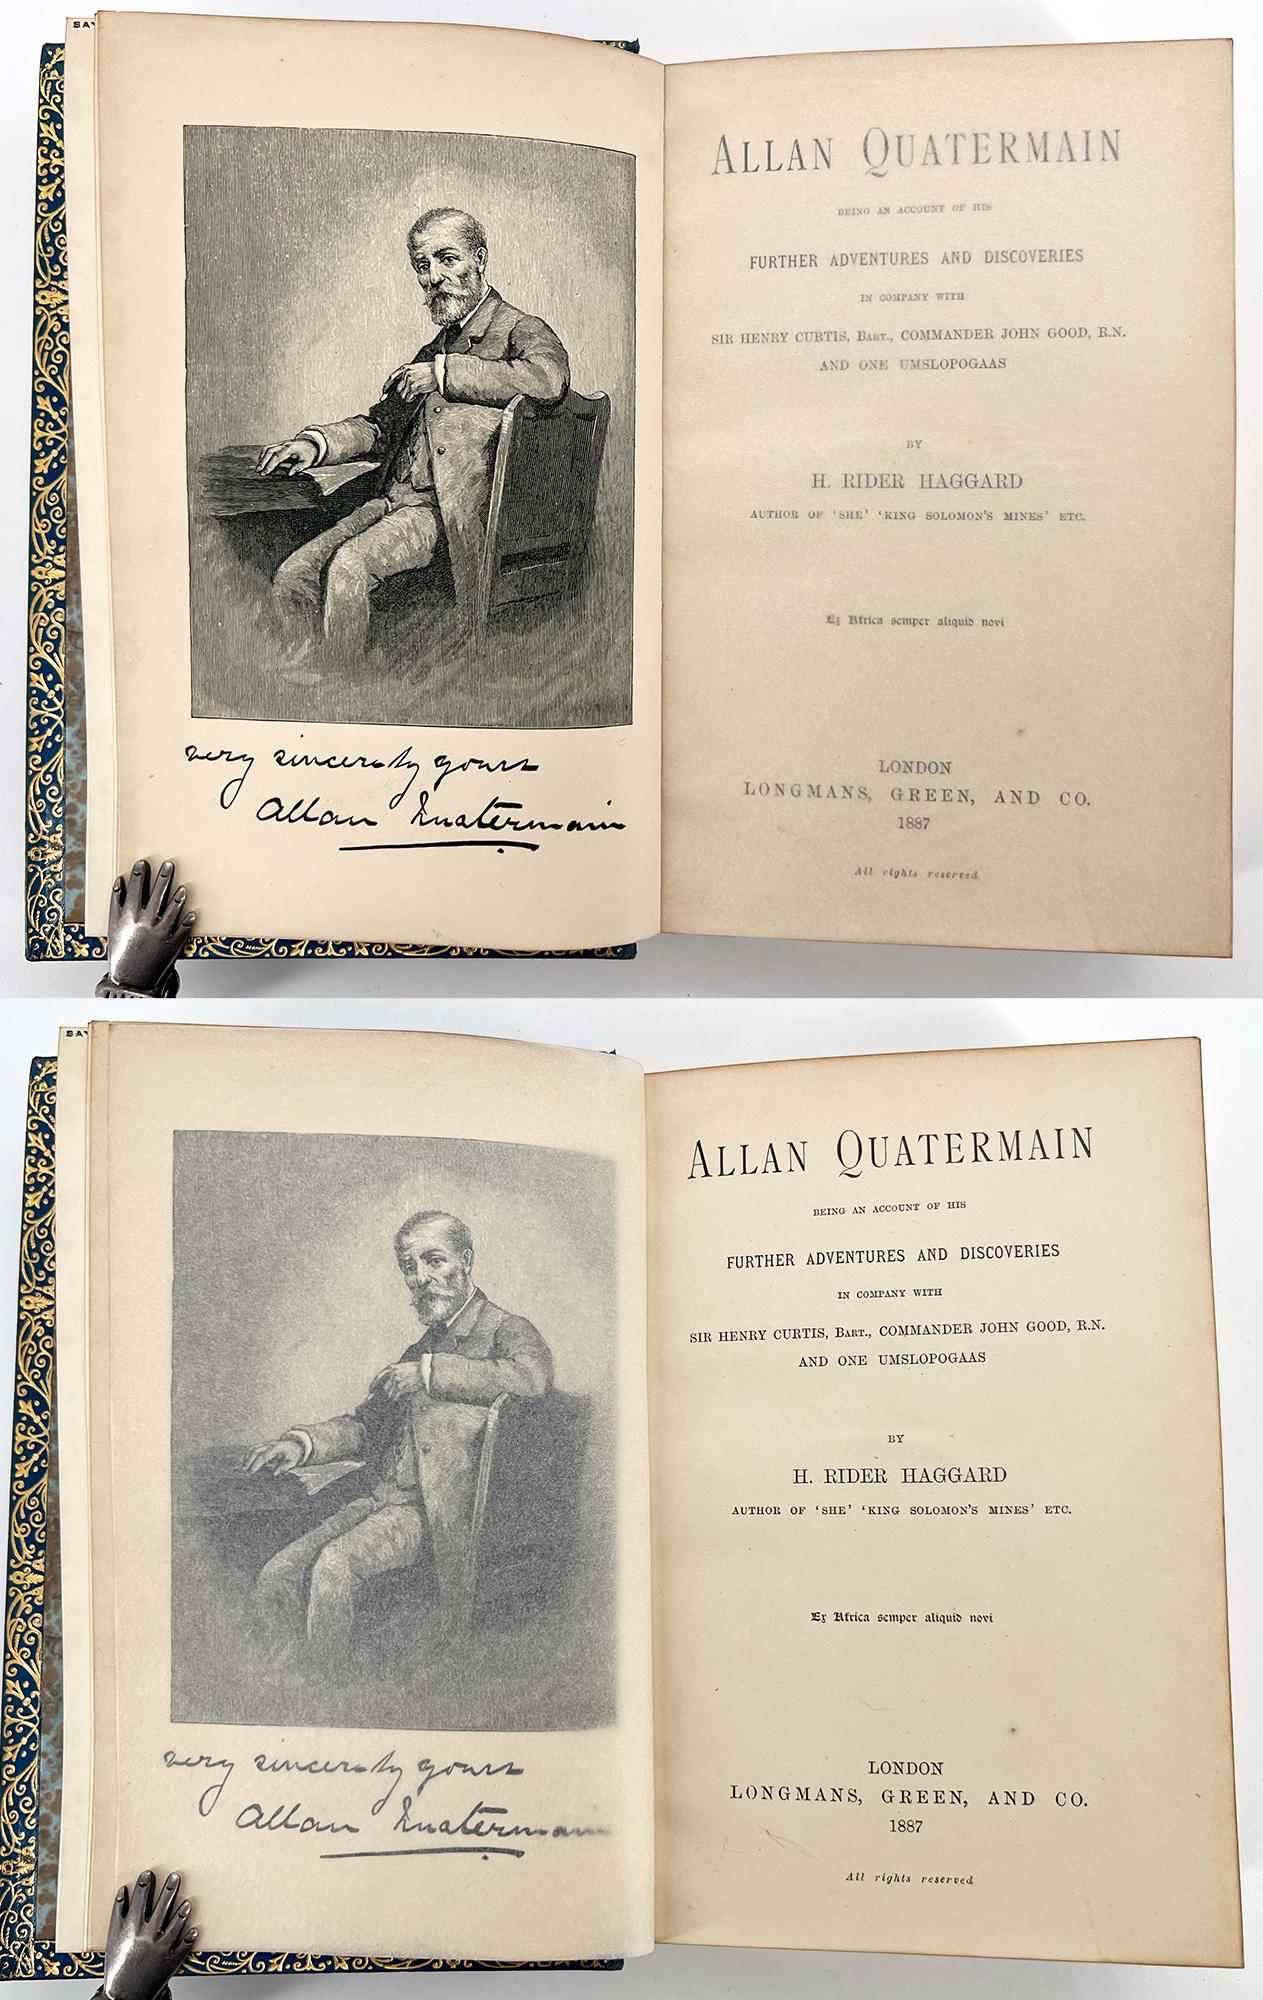 Allan Quatermain; Being an Account of His Further Adventures and Discoveries, etc.

London: Longmans, Green and Co., 1887. 
8vo. 7 1/4 x 4 3/4 (184 x 120 mm); viii, 280; 20 wood engraved illustrations by J. Cooper from drawings by C. H. M. Kerr,